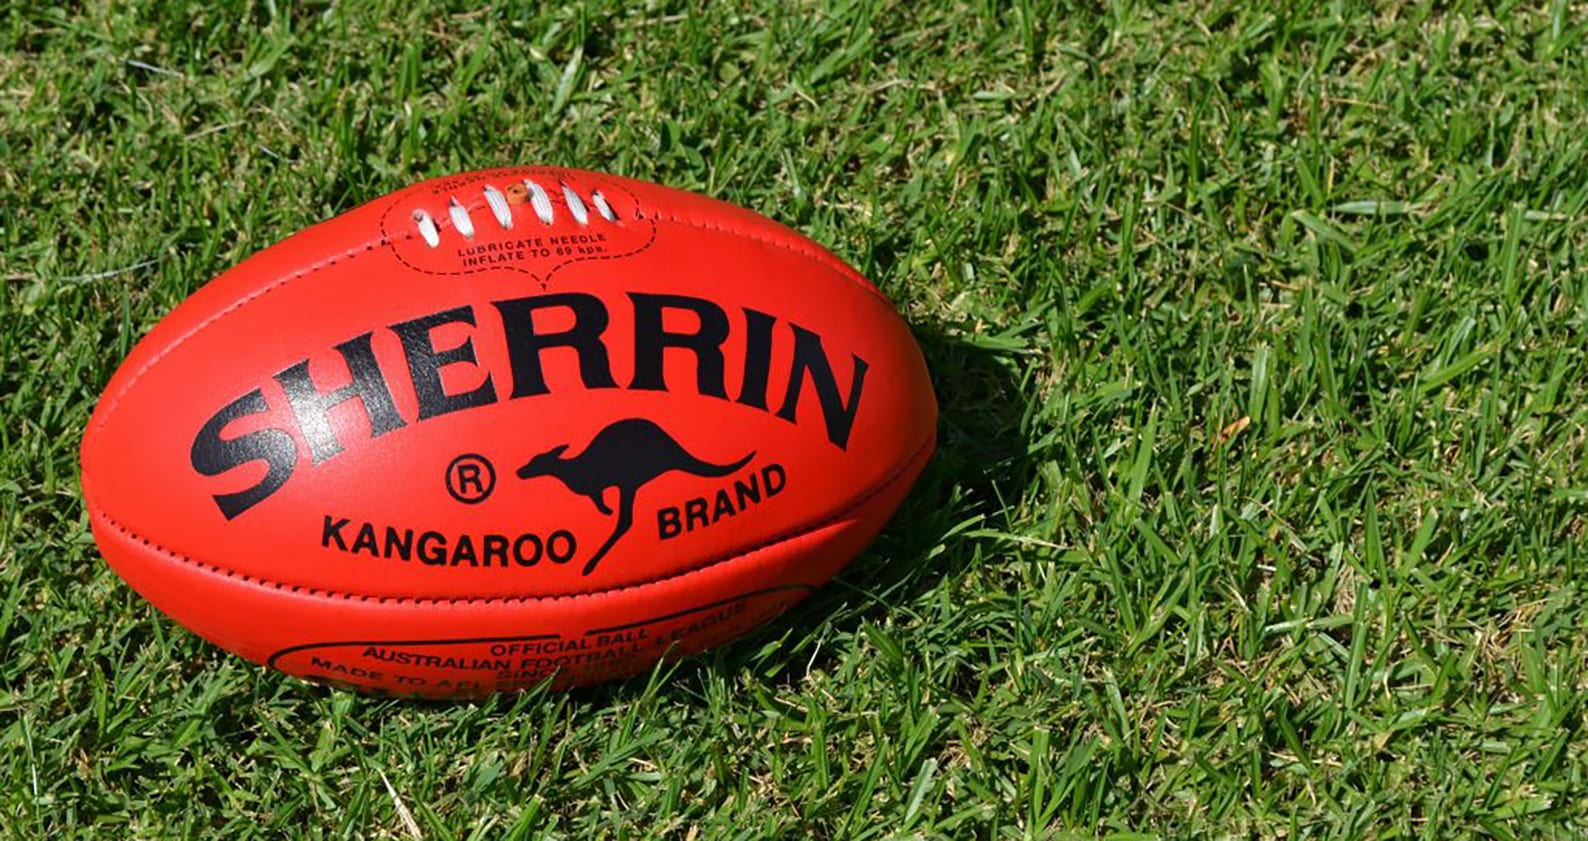 Image for Curtin program uses AFL clubs to improve male footy fans’ health